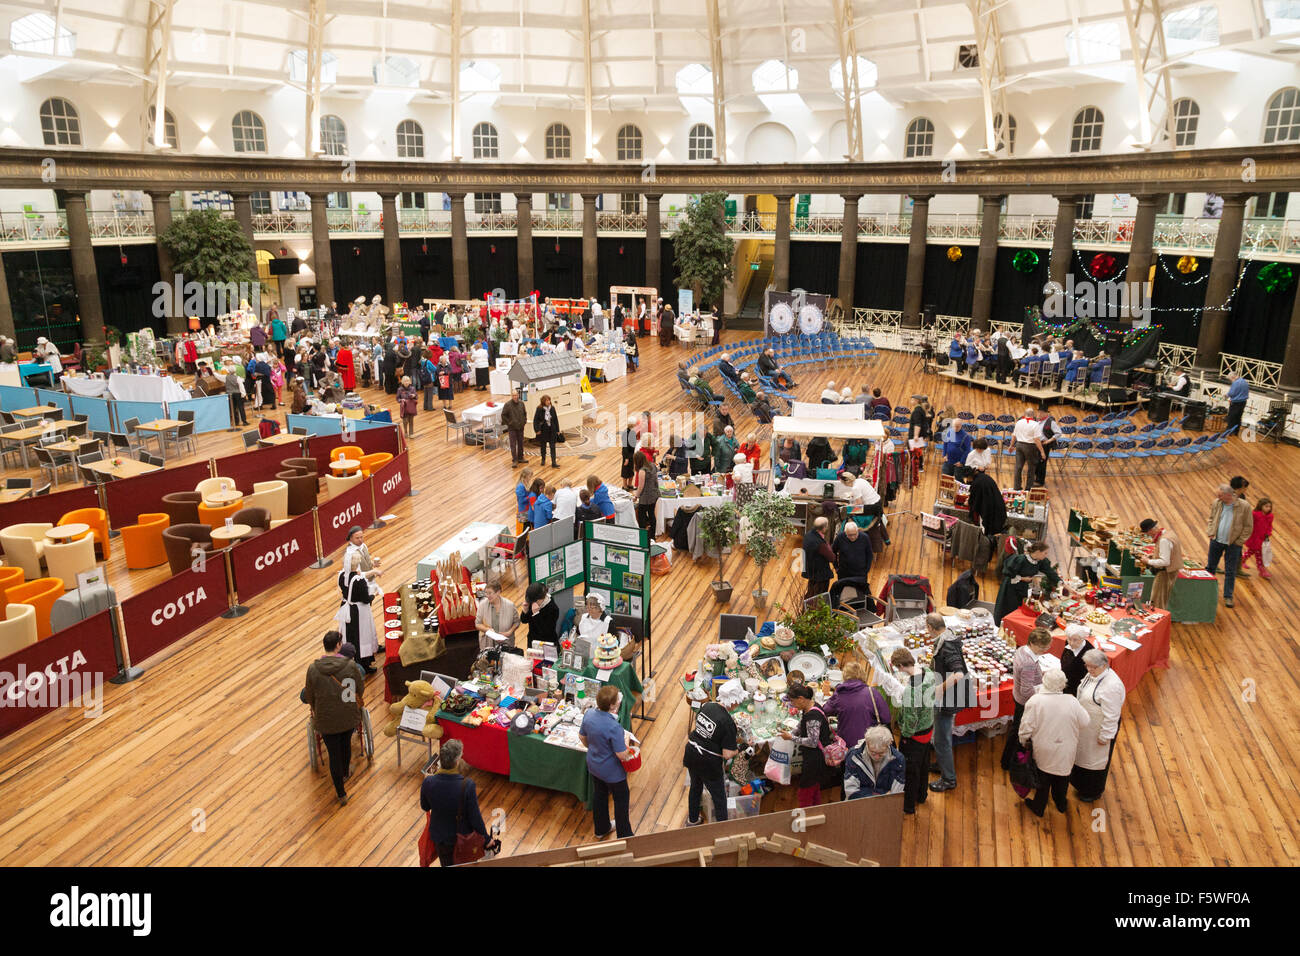 People at an indoor market, the Derbyshire Dome, Buxton, Derbyshire England UK Stock Photo